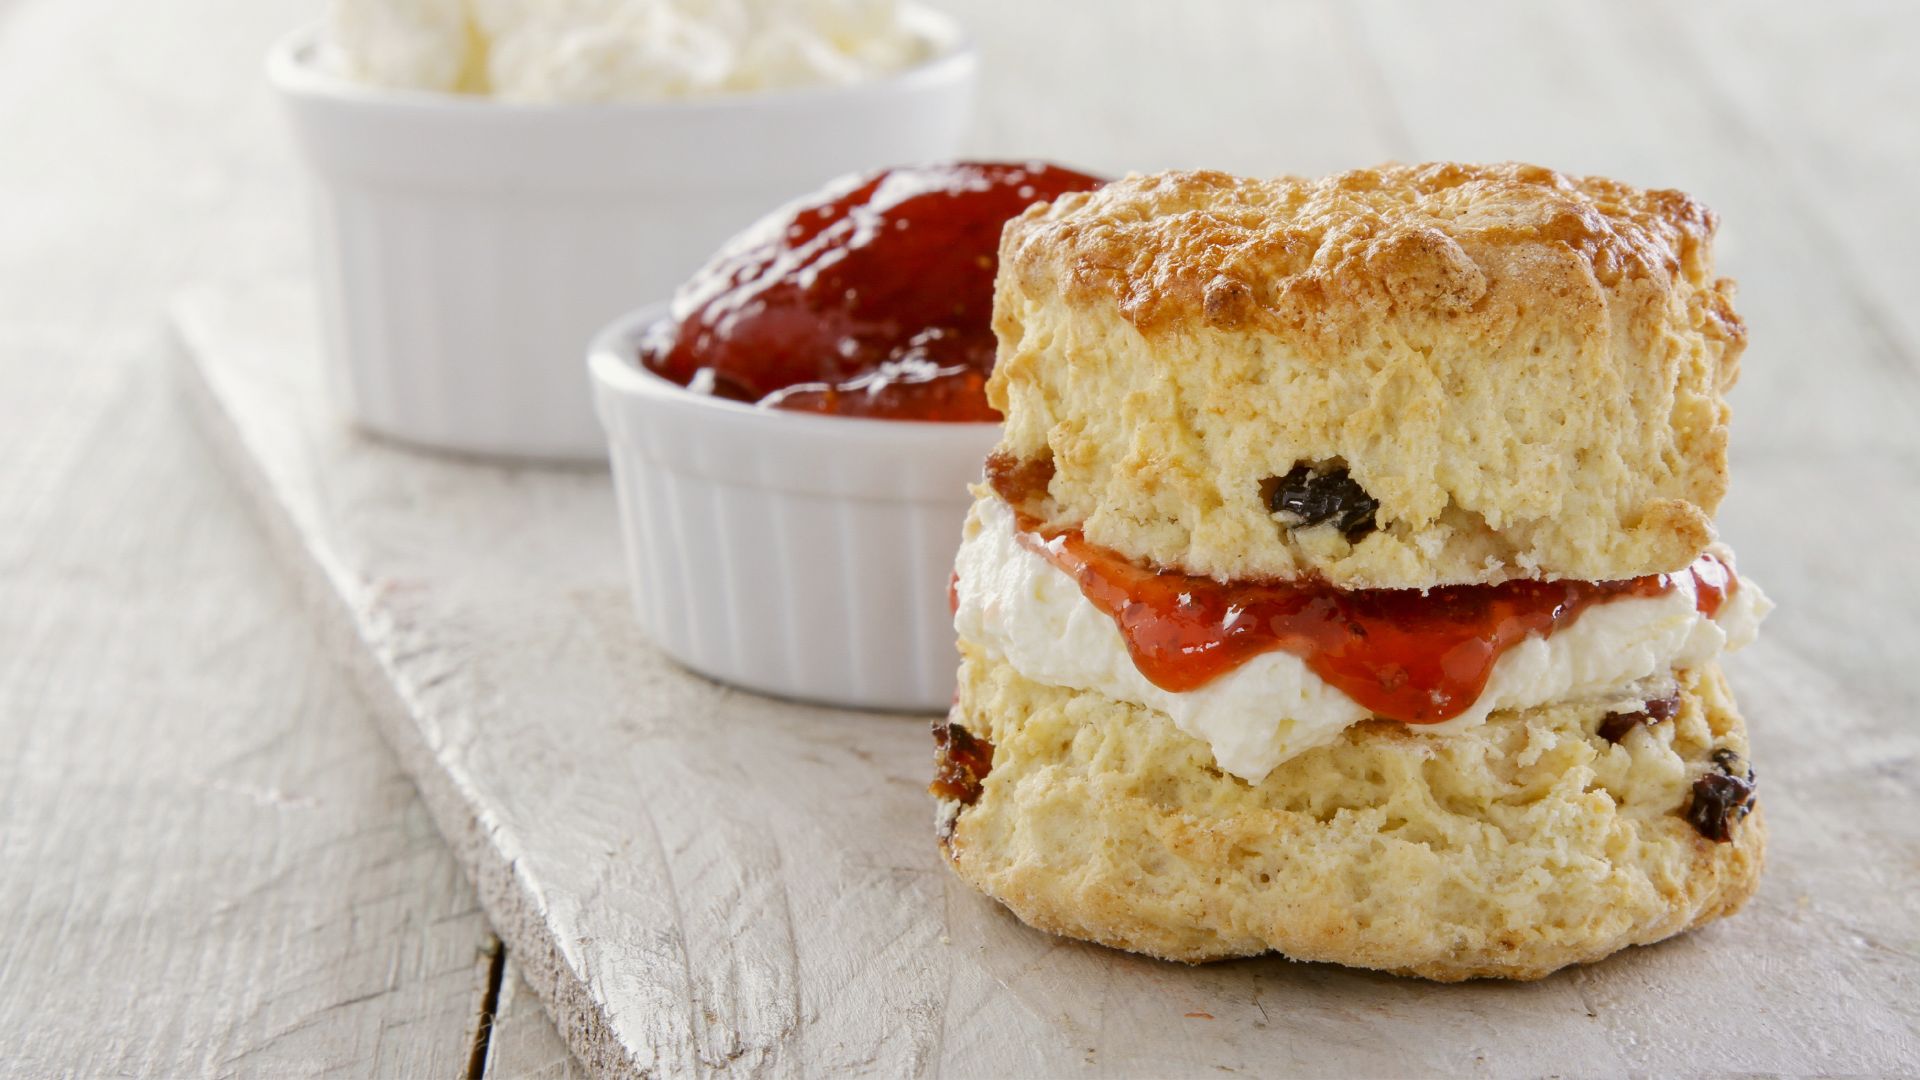 scone cream and jam on a wooden board